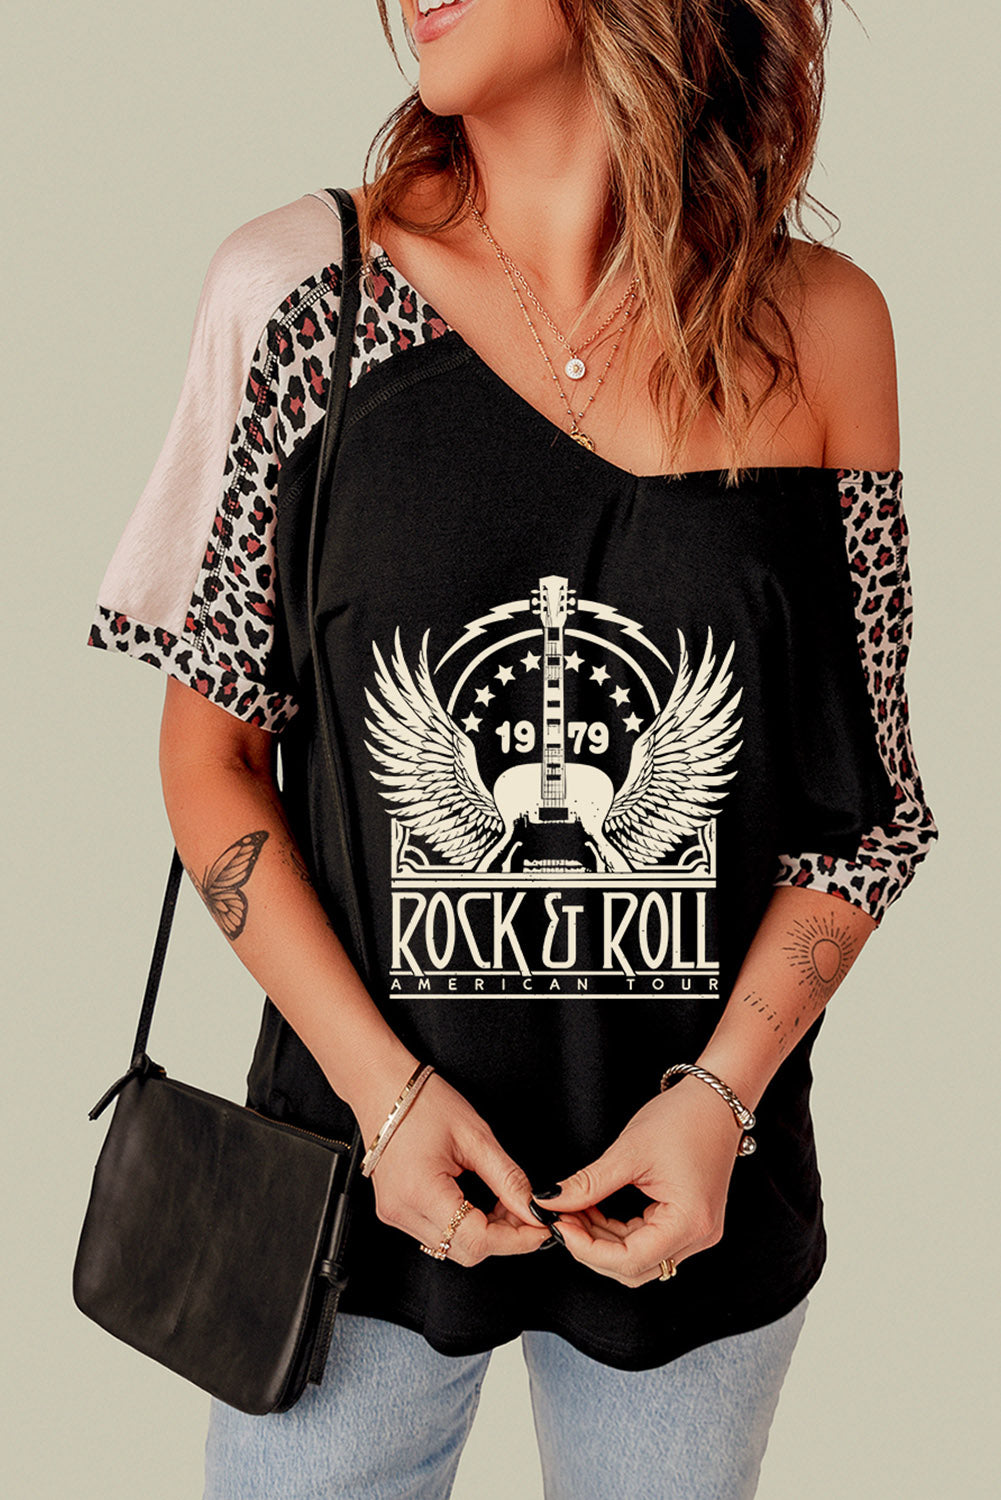 1979 ROCK & ROLL AMERICAN TOUR Graphic V-Neck Tee - nailedmoms